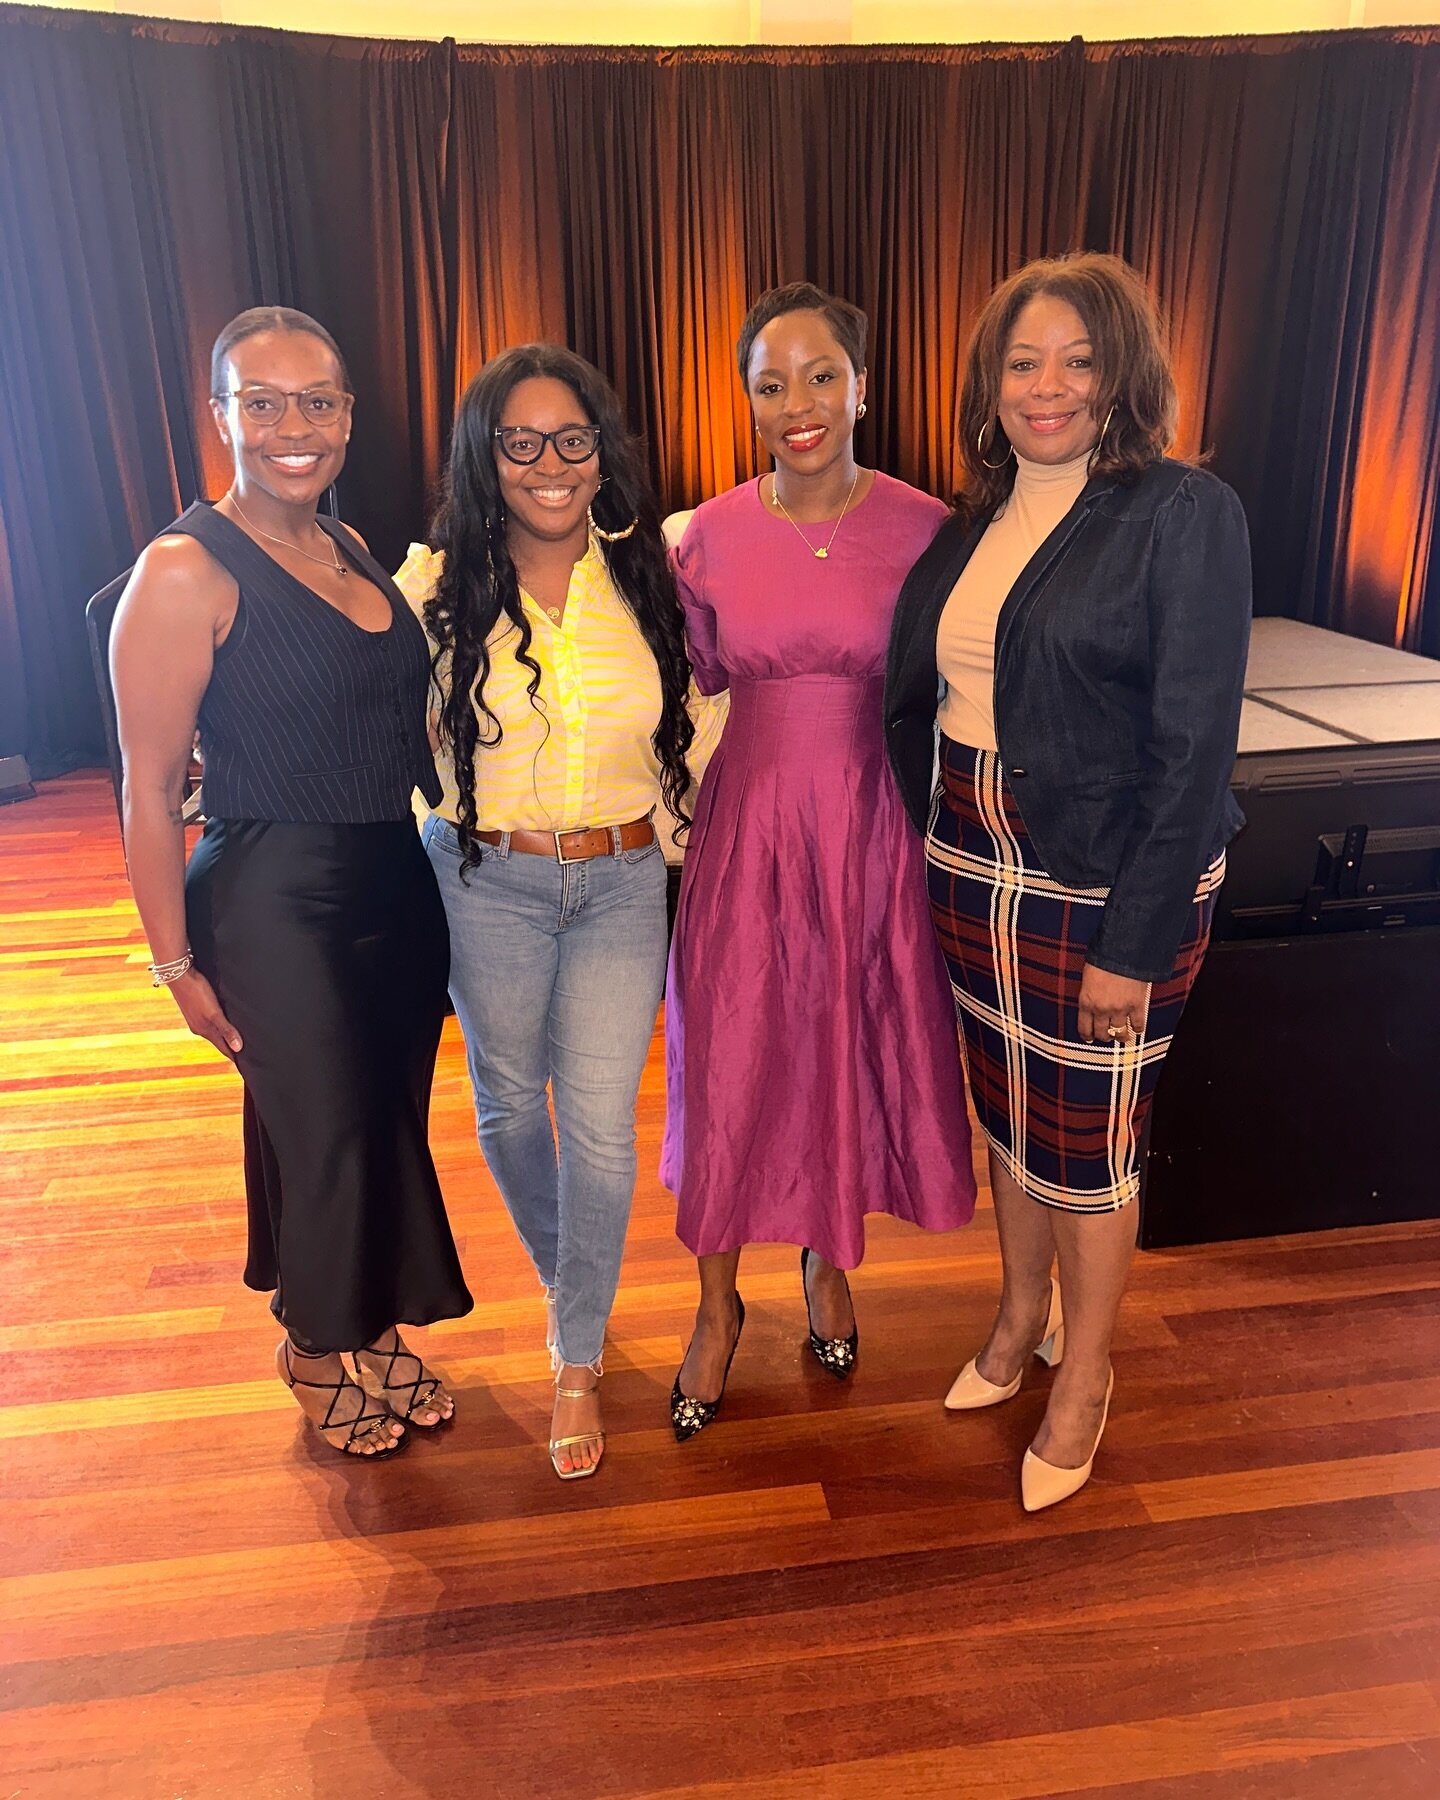 Huge thanks to JP Morgan Chase, Dianna , and Renee for the invite to Building a New Legacy: A Summit for Black and Latina Women! 

Such an honor to meet Bola Sokunbi, @clevergirlfinance a favorite author and CFEI, whose work inspires my financial lit